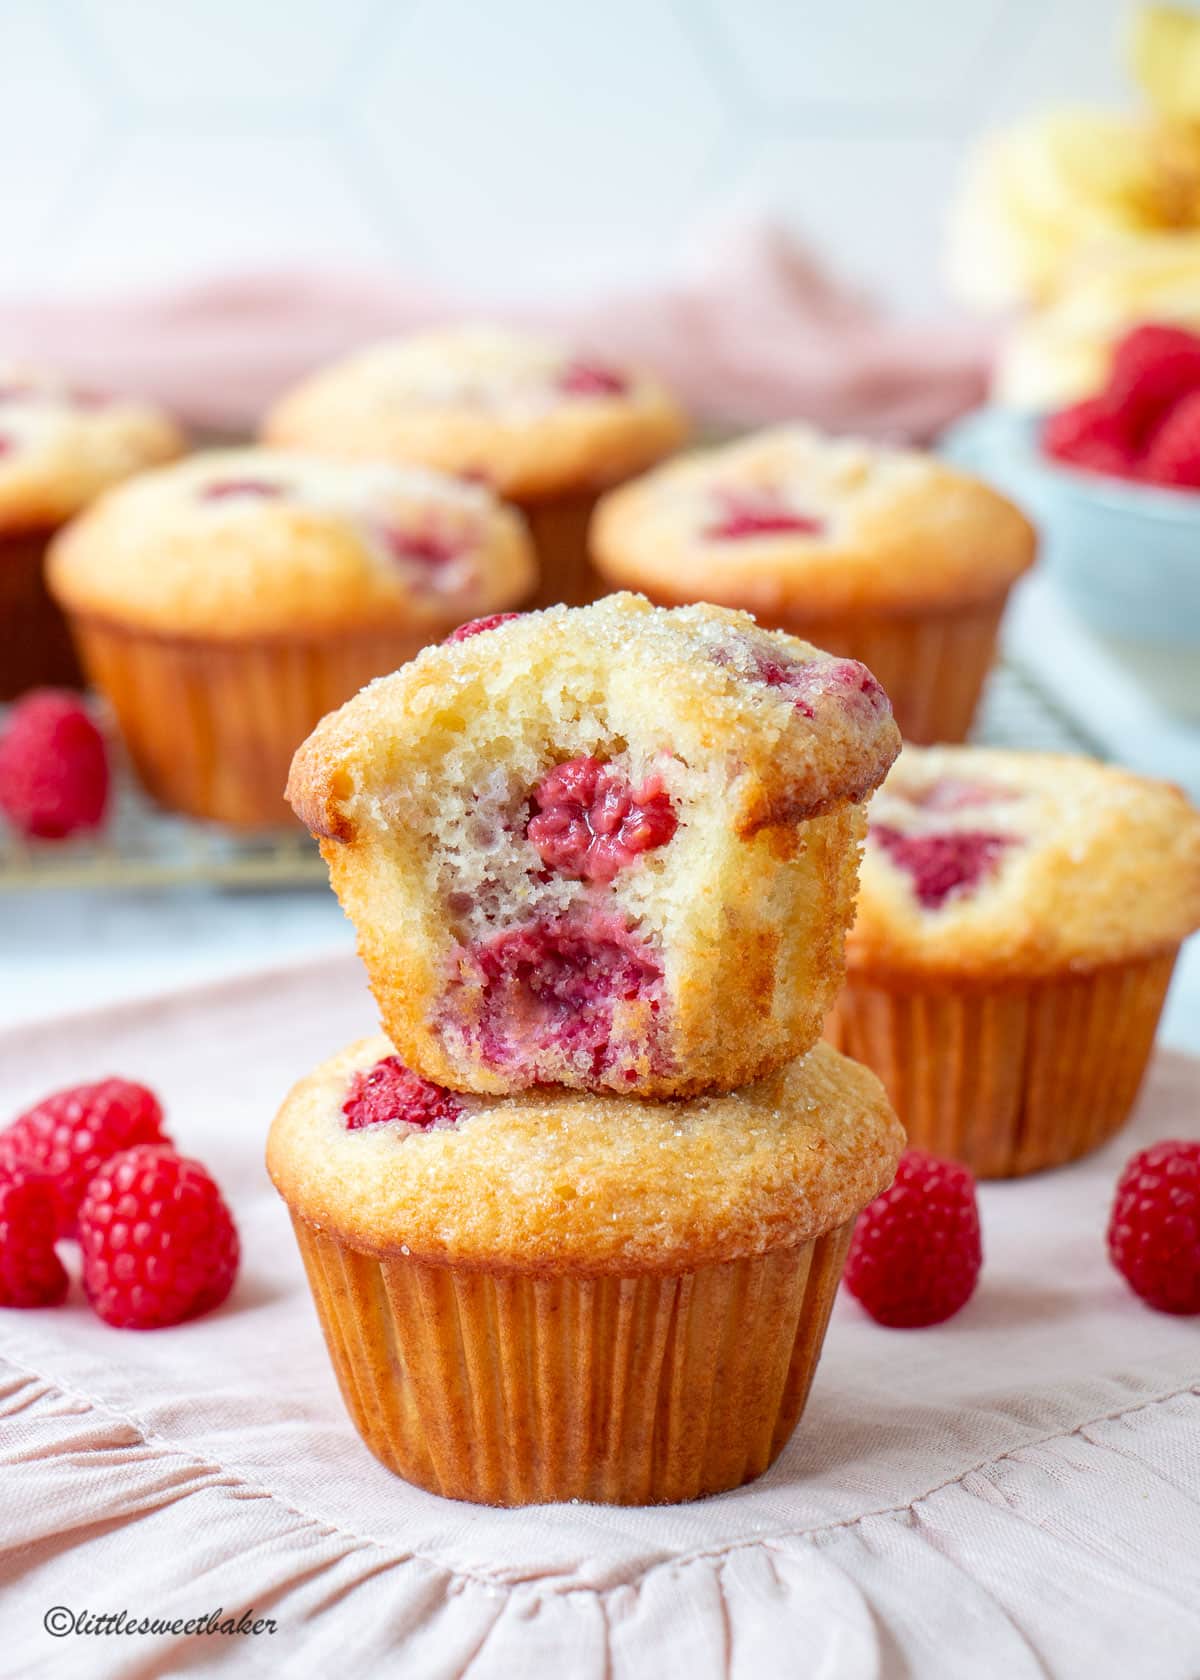 Two muffins stacked with a bite taken out of the top one.